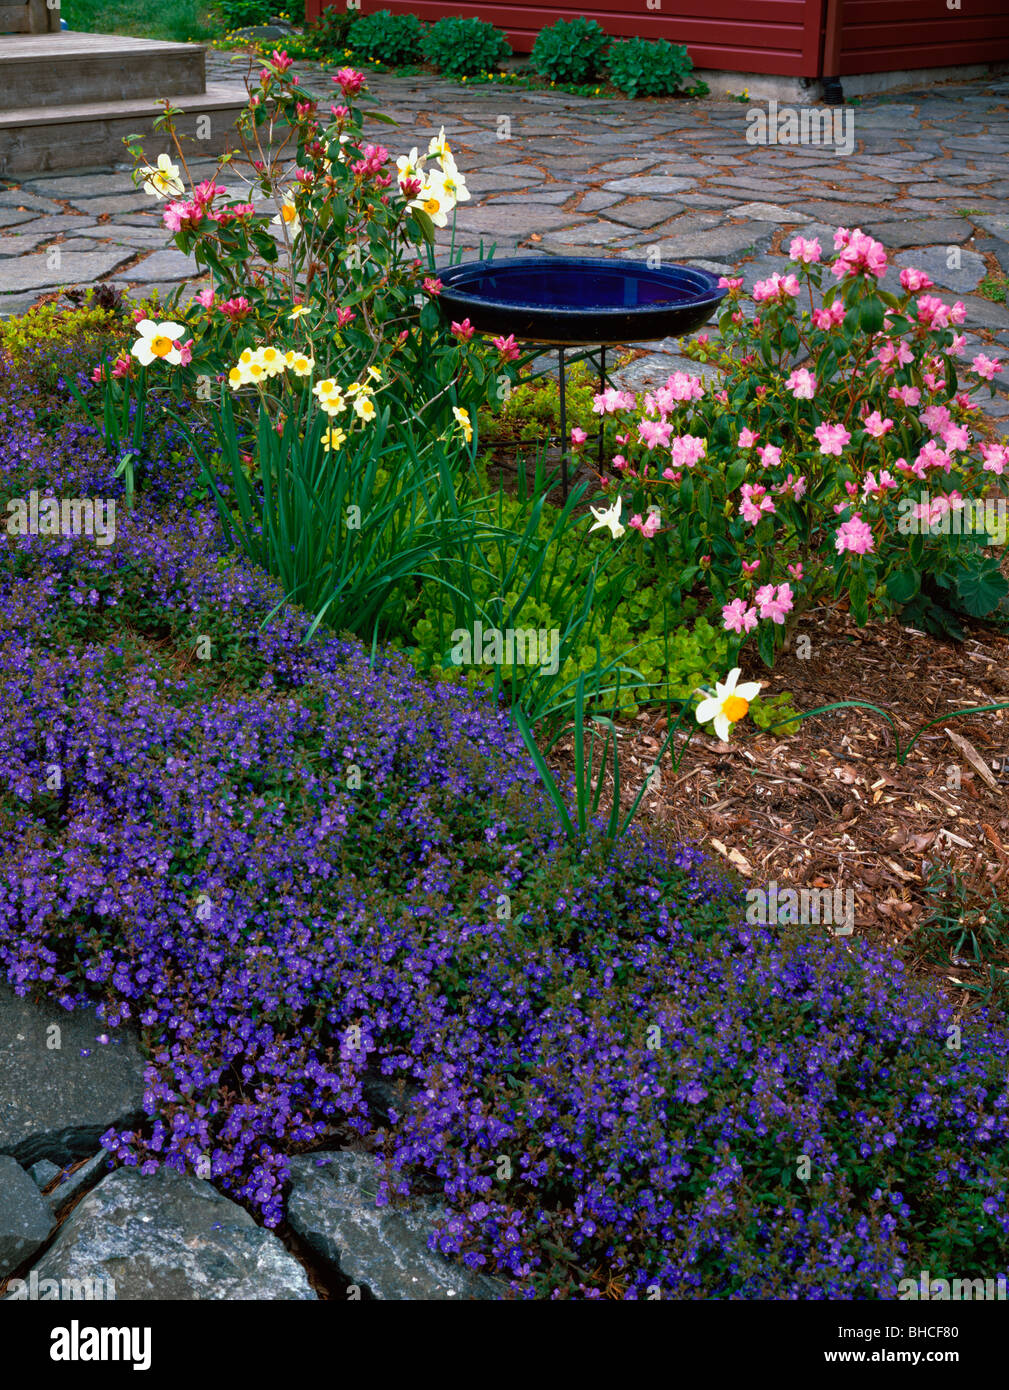 A blue bird bath rests among 'Pioneer pink' rhododendrons, narcissus and Veronica peduncularis on Vashon Island, WA Stock Photo